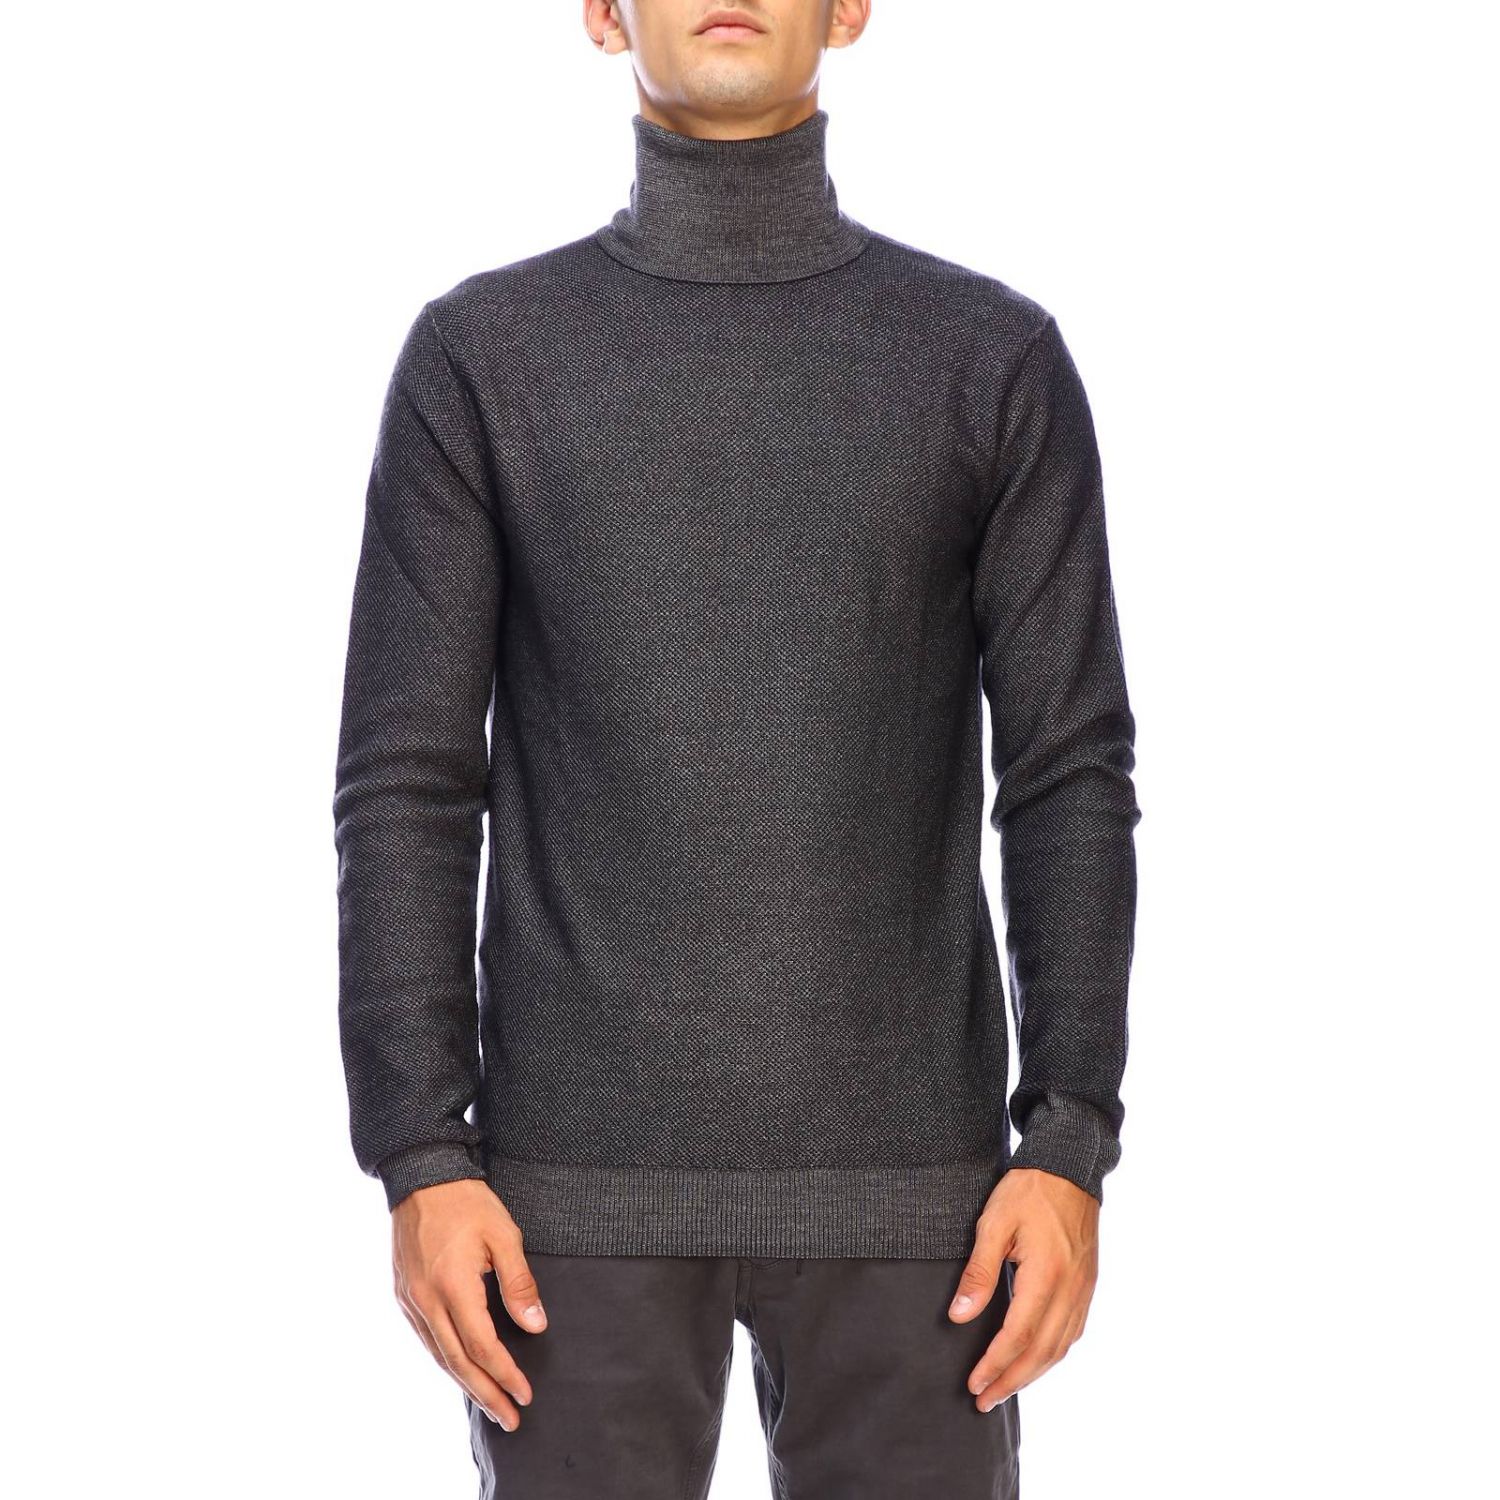 Paolo Pecora Outlet: Sweater man - Charcoal | Paolo Pecora Sweater A030 ...